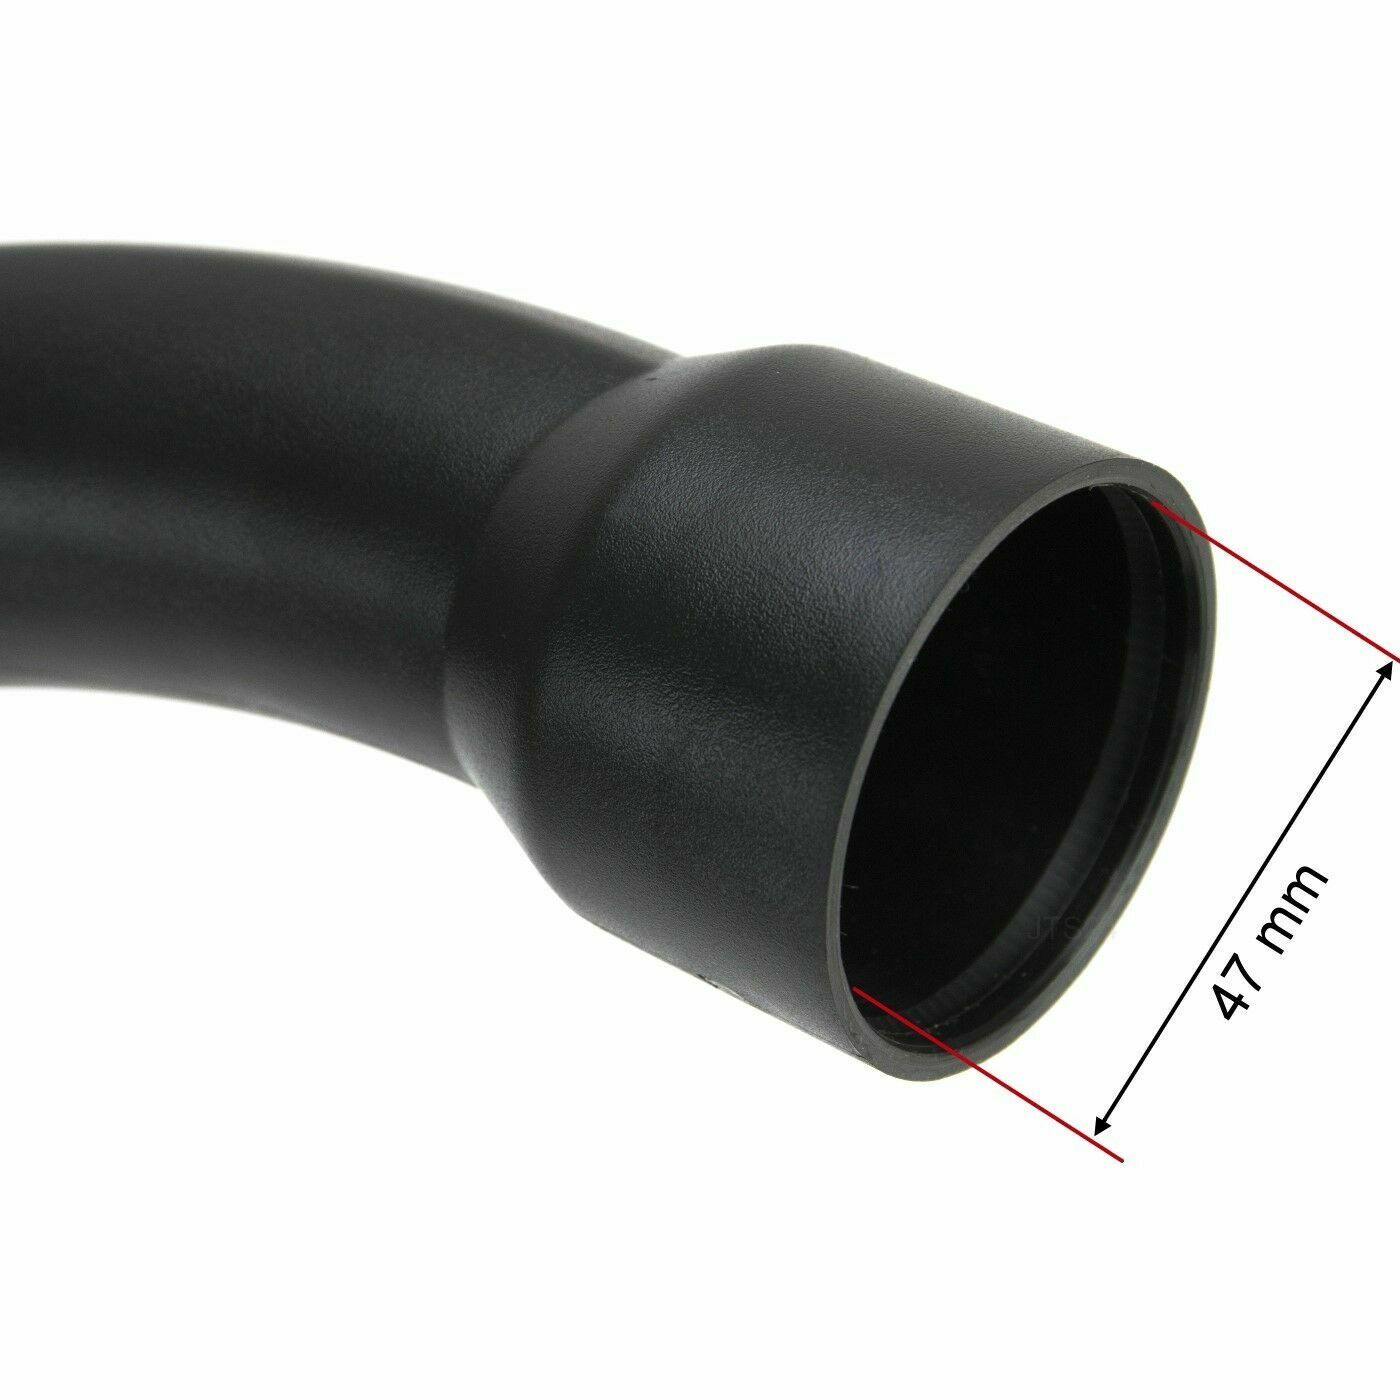 Suction Hose Bent End Curved Handle For Miele S Series Vacuum Cleaners Hoover Sparesbarn